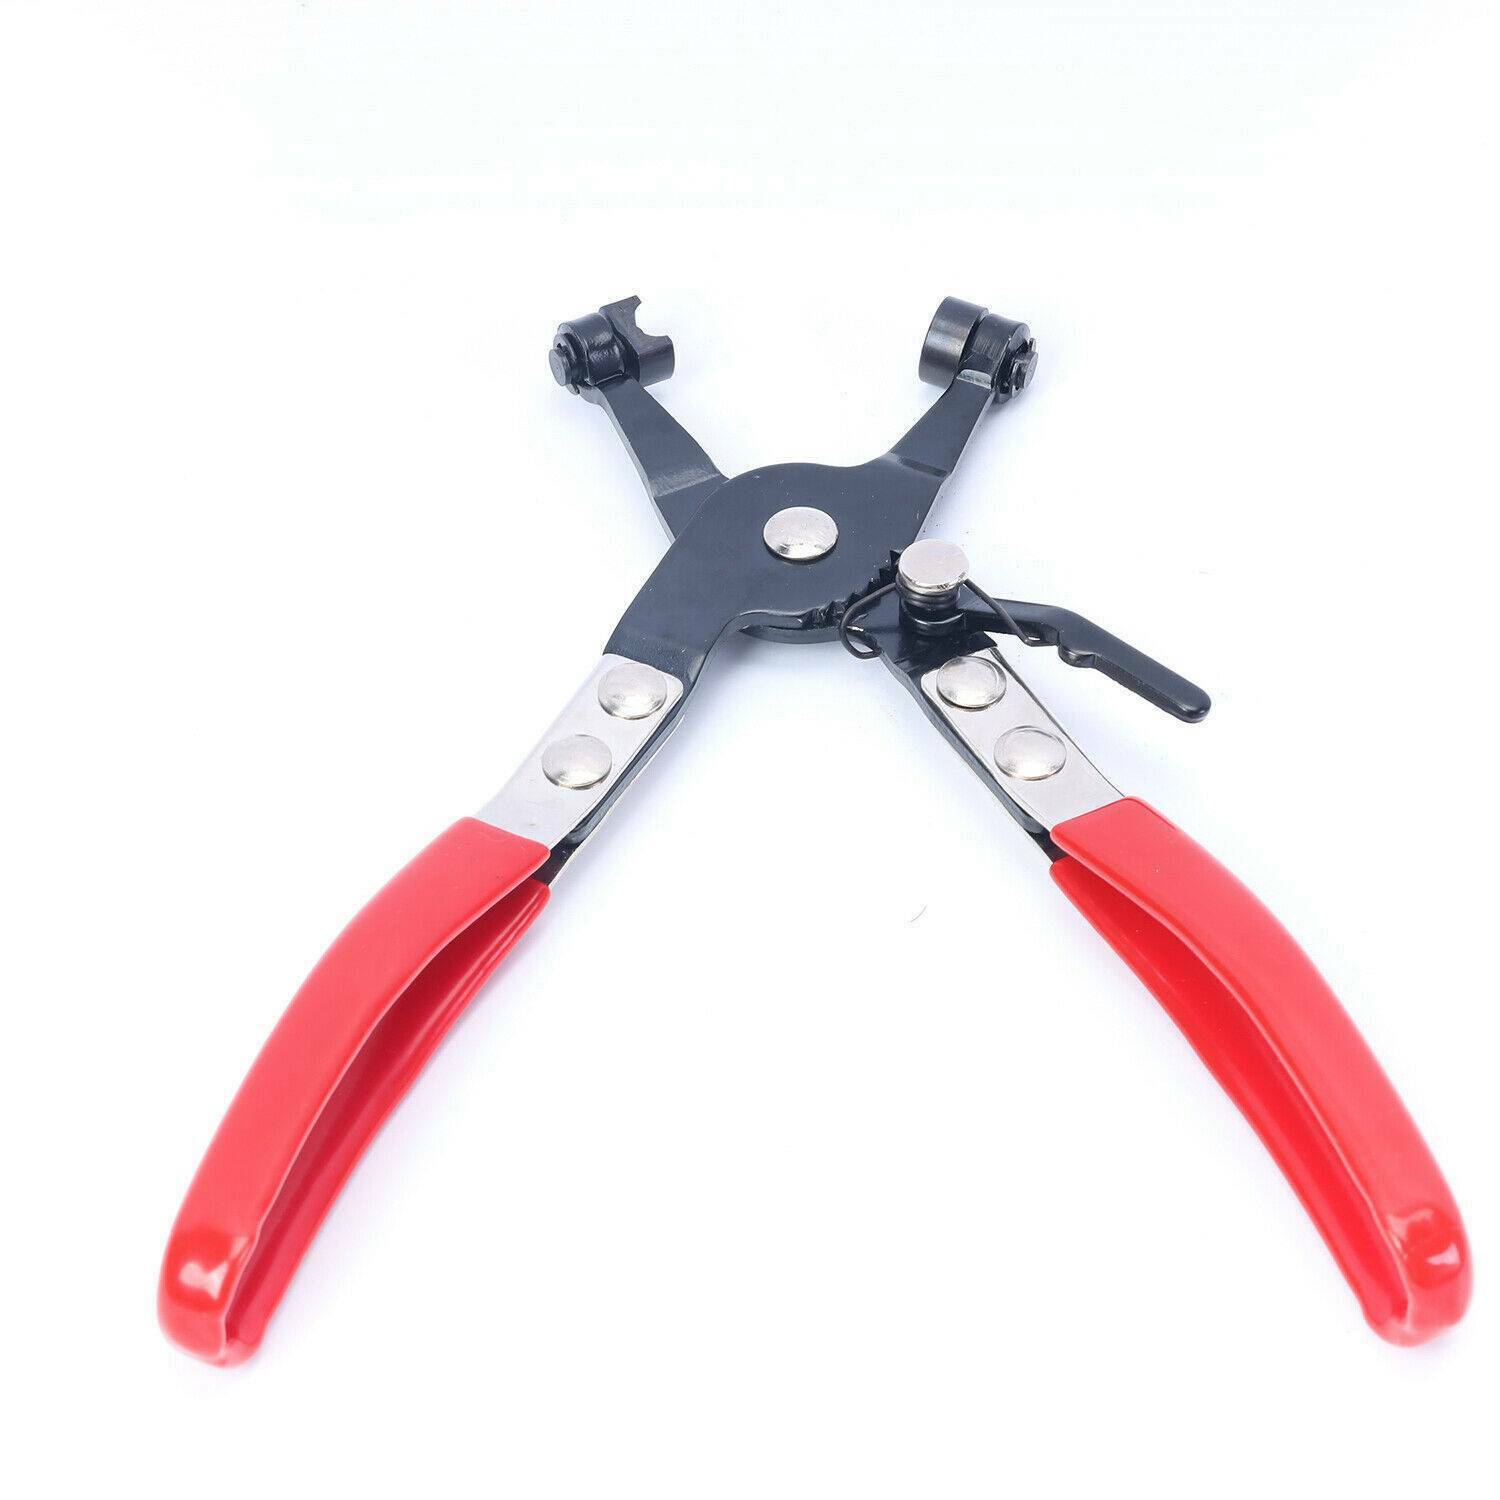 Hose Clamp Pliers Band Flat Ring Install Pliers Mechanics Auto Repair Tools